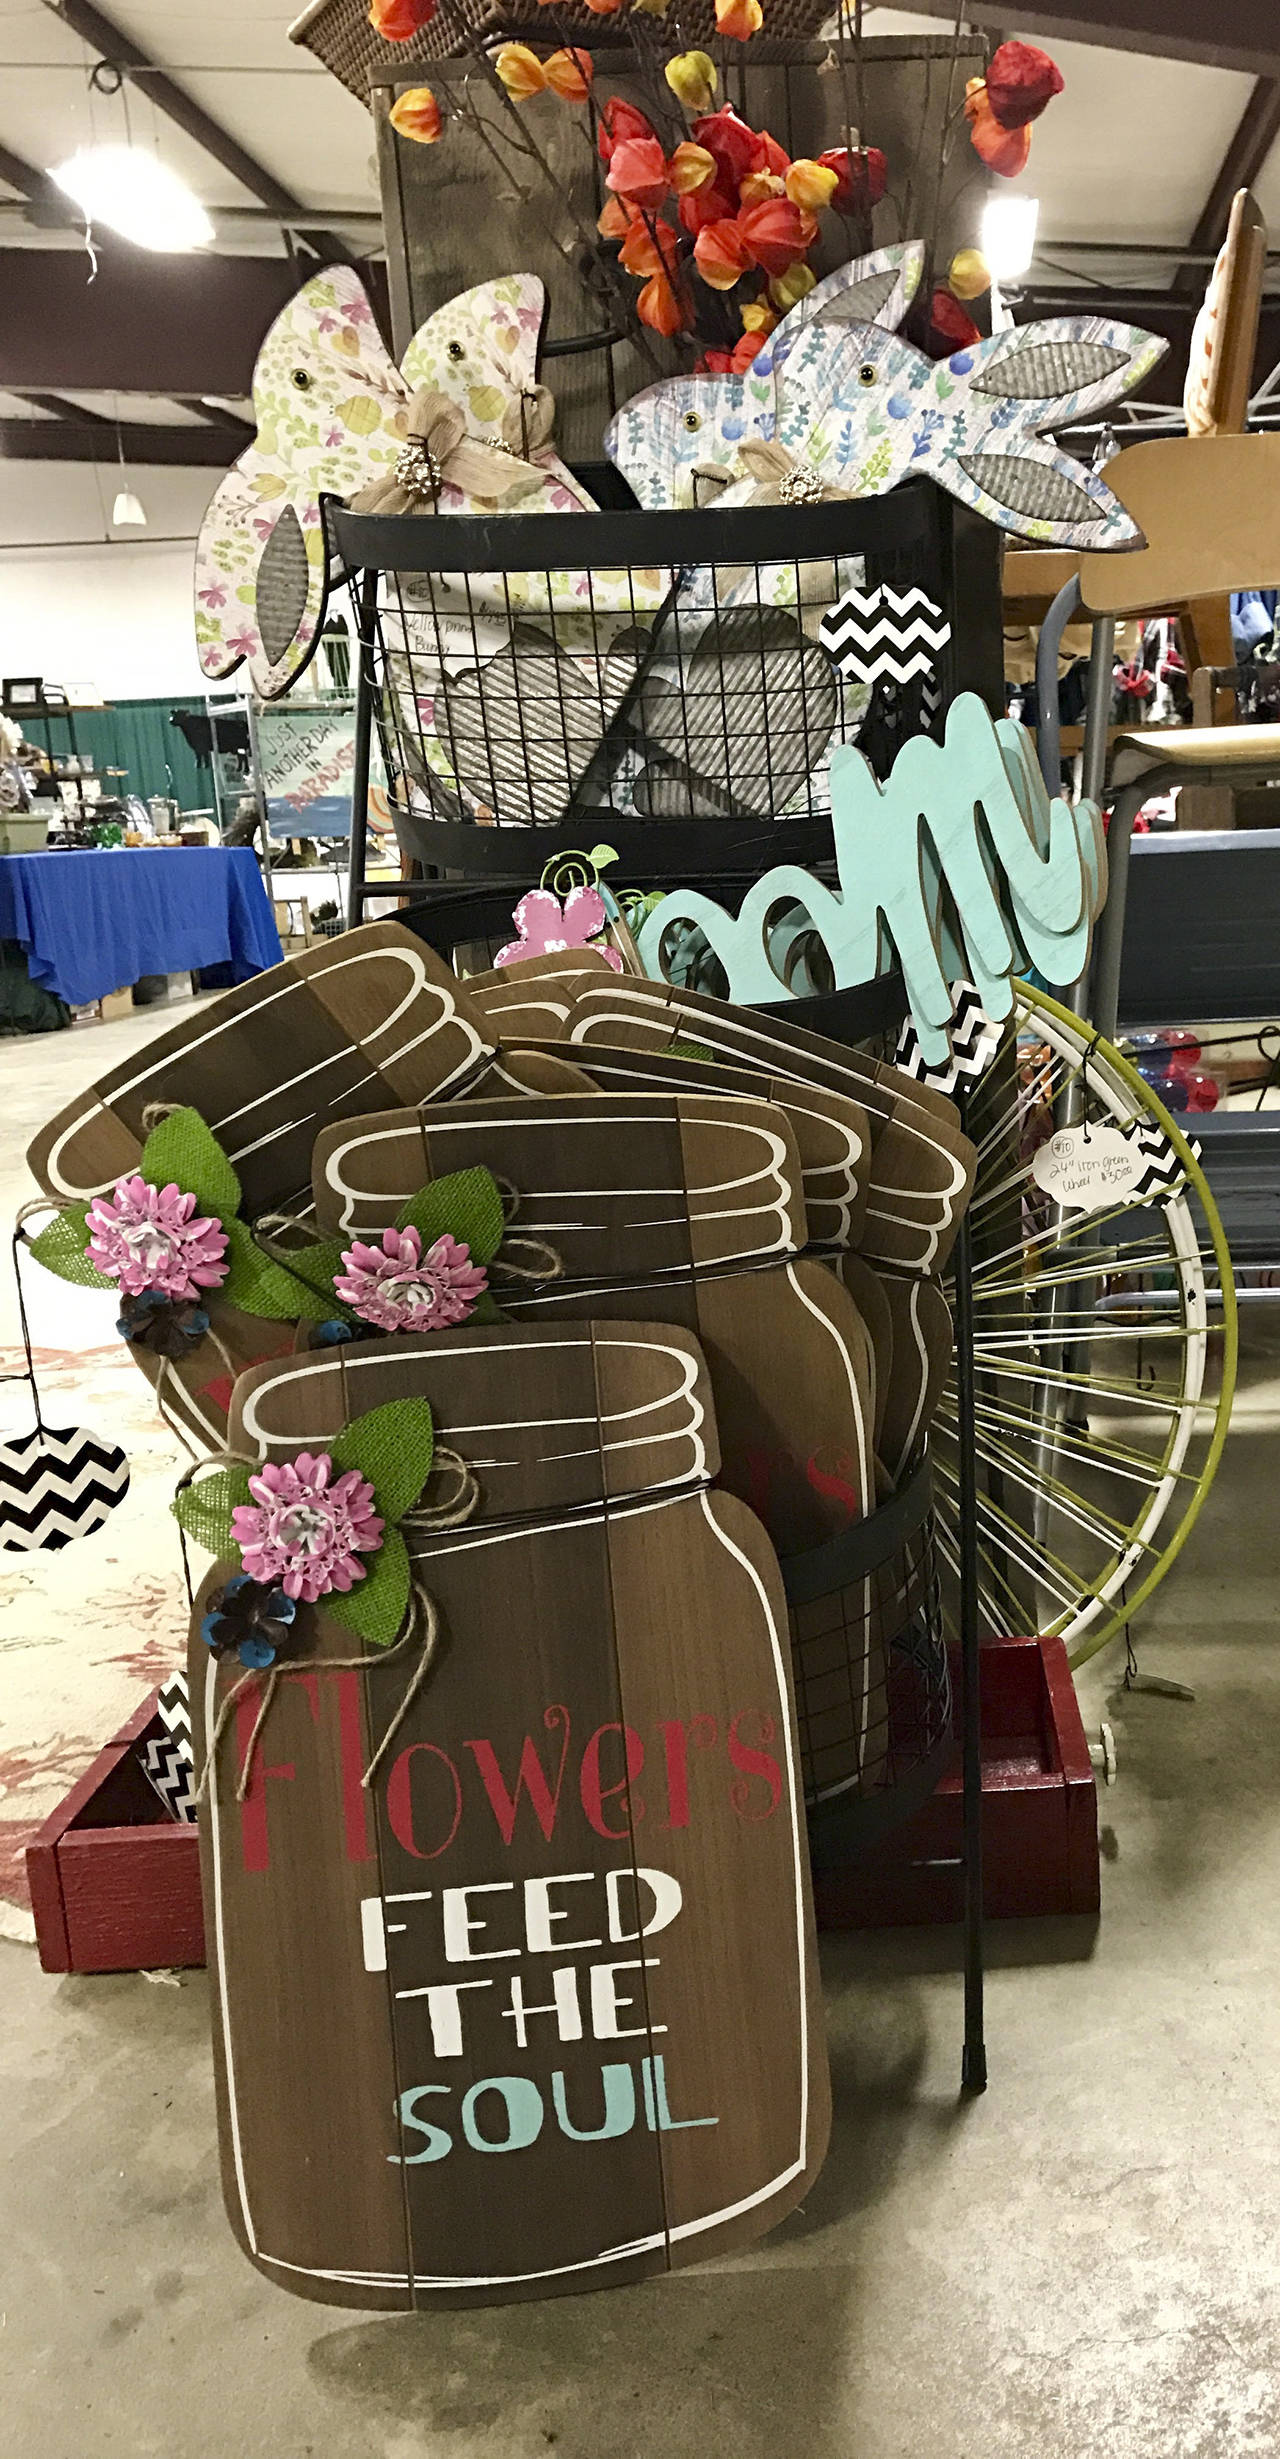 About 65 artisans and vendors from all over the region will offer vintage items, primitives, antiques, shabby chic, country collectables and garden art at the American Junk Queens show this weekend in Elma. (Courtesy photo)